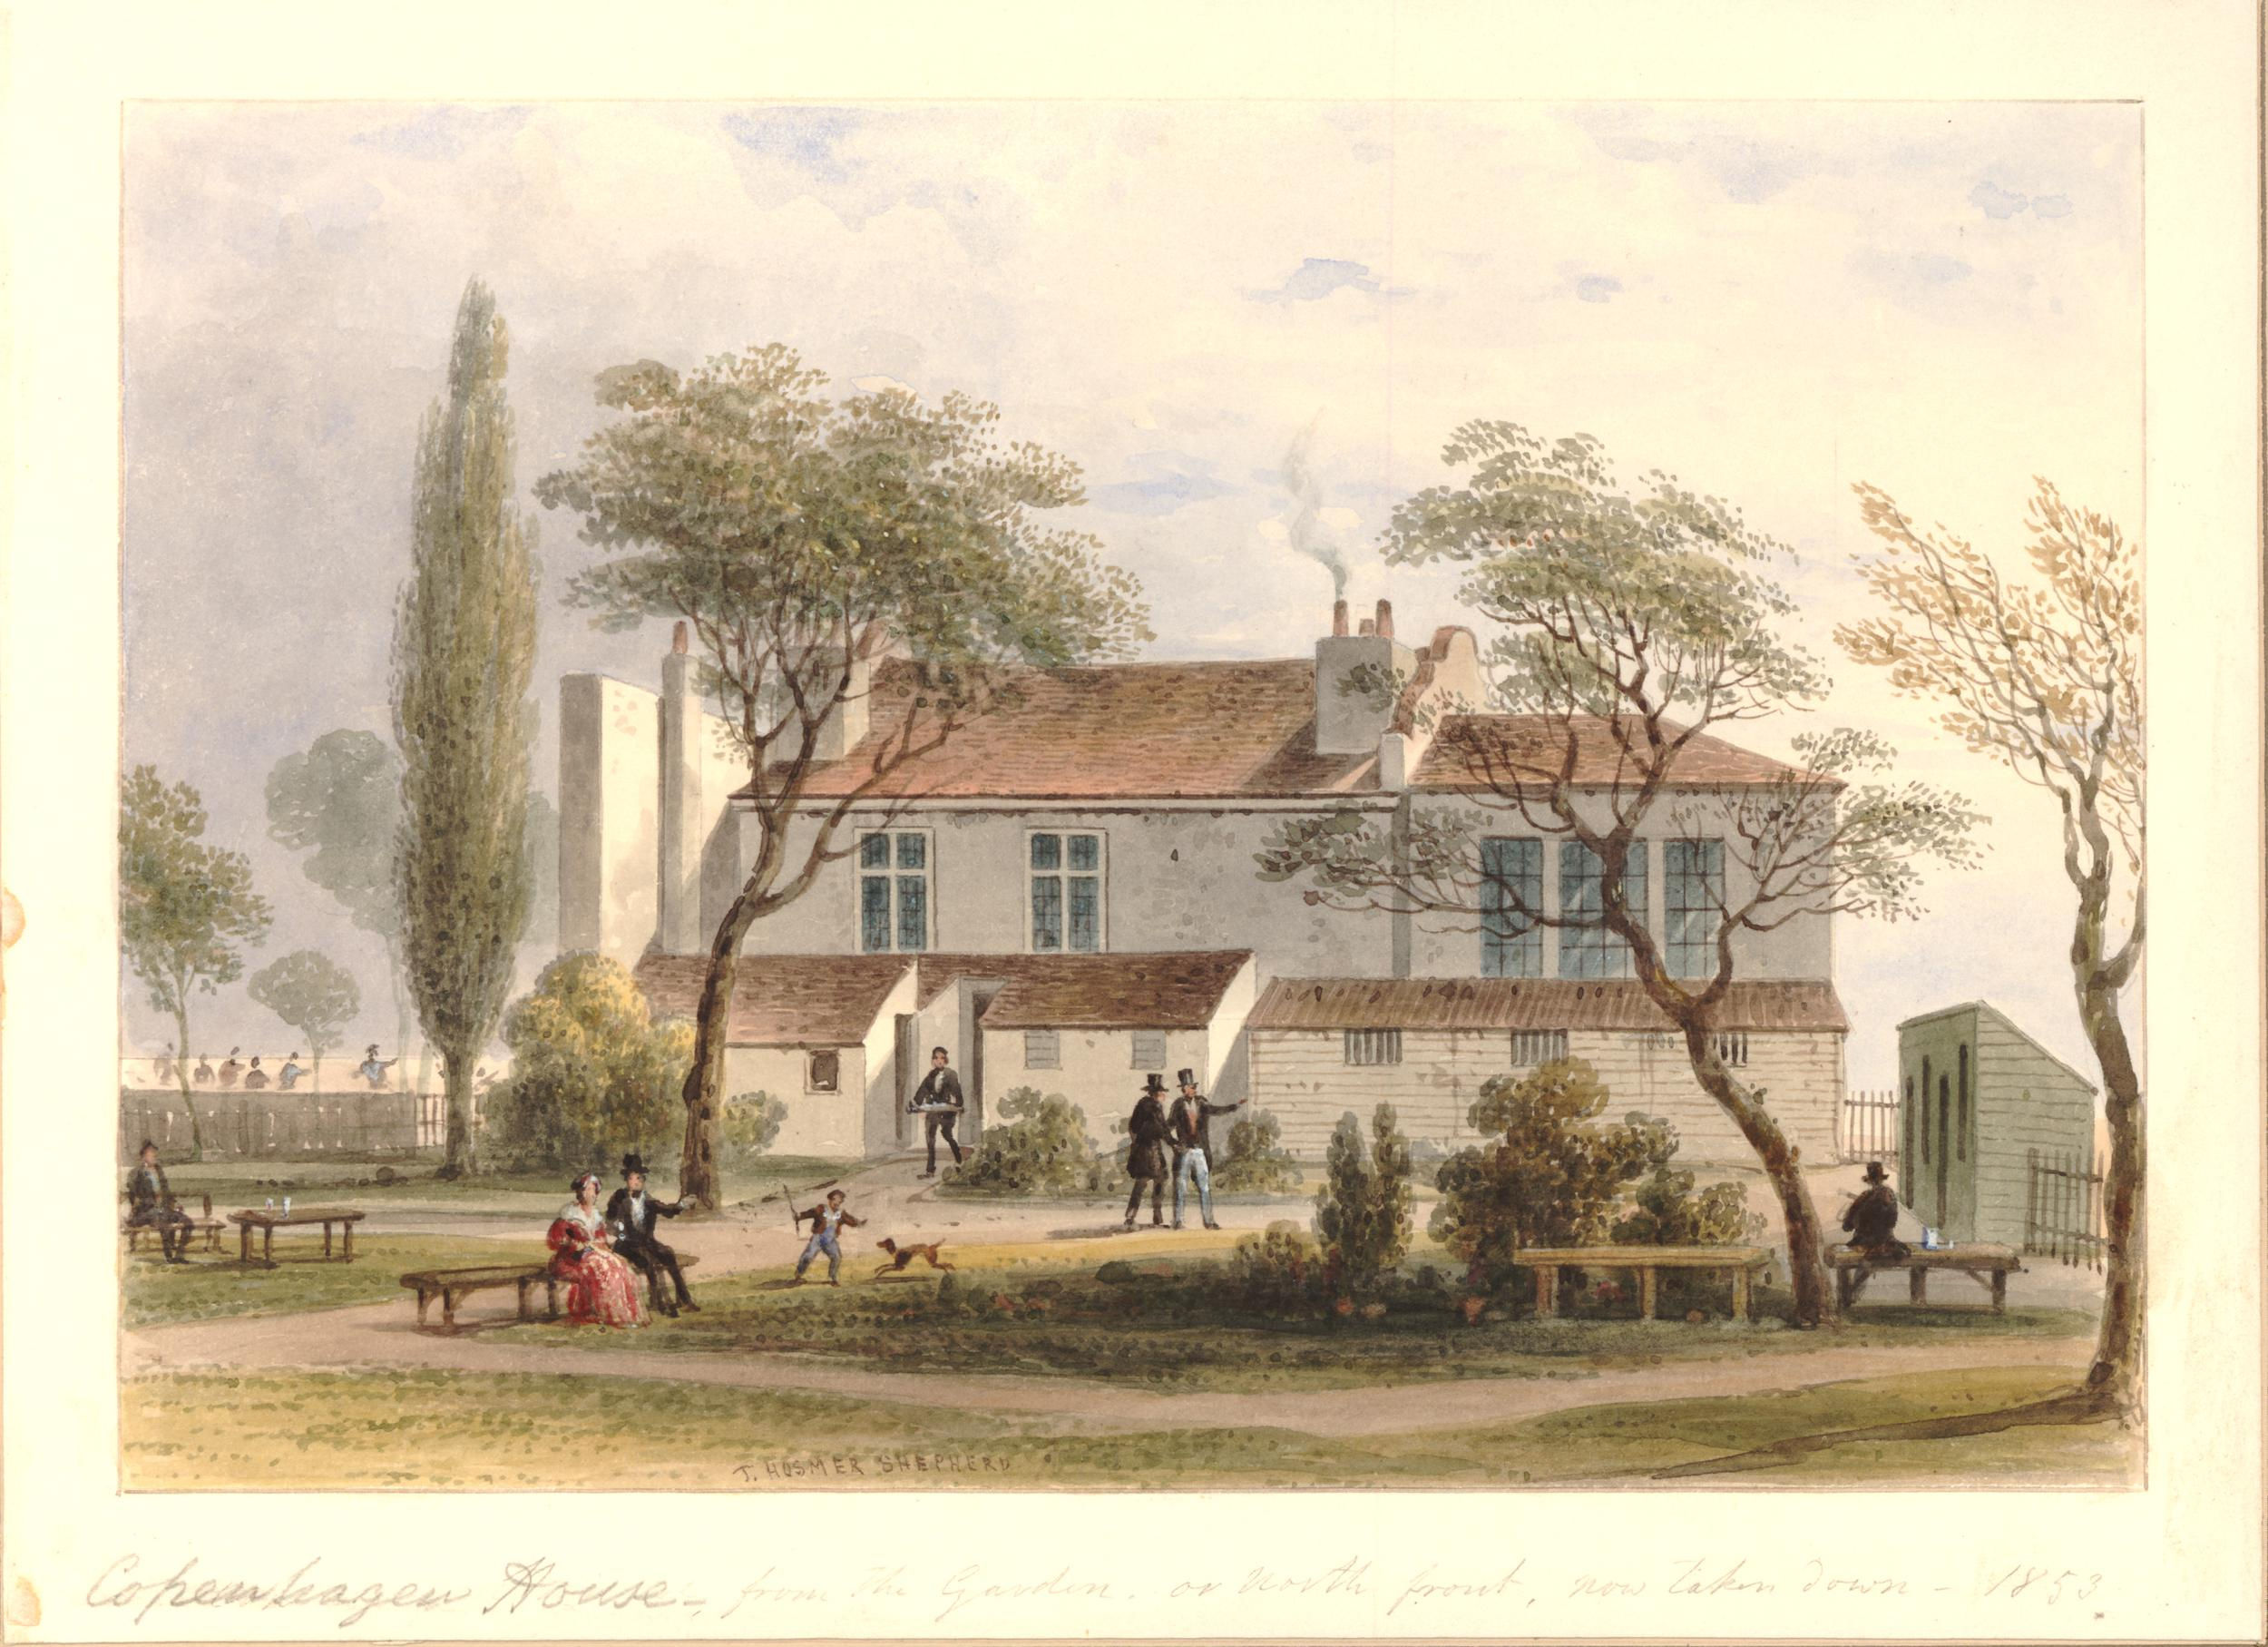 Watercolor painting of white building with several people standing in the lawn in front of the building.